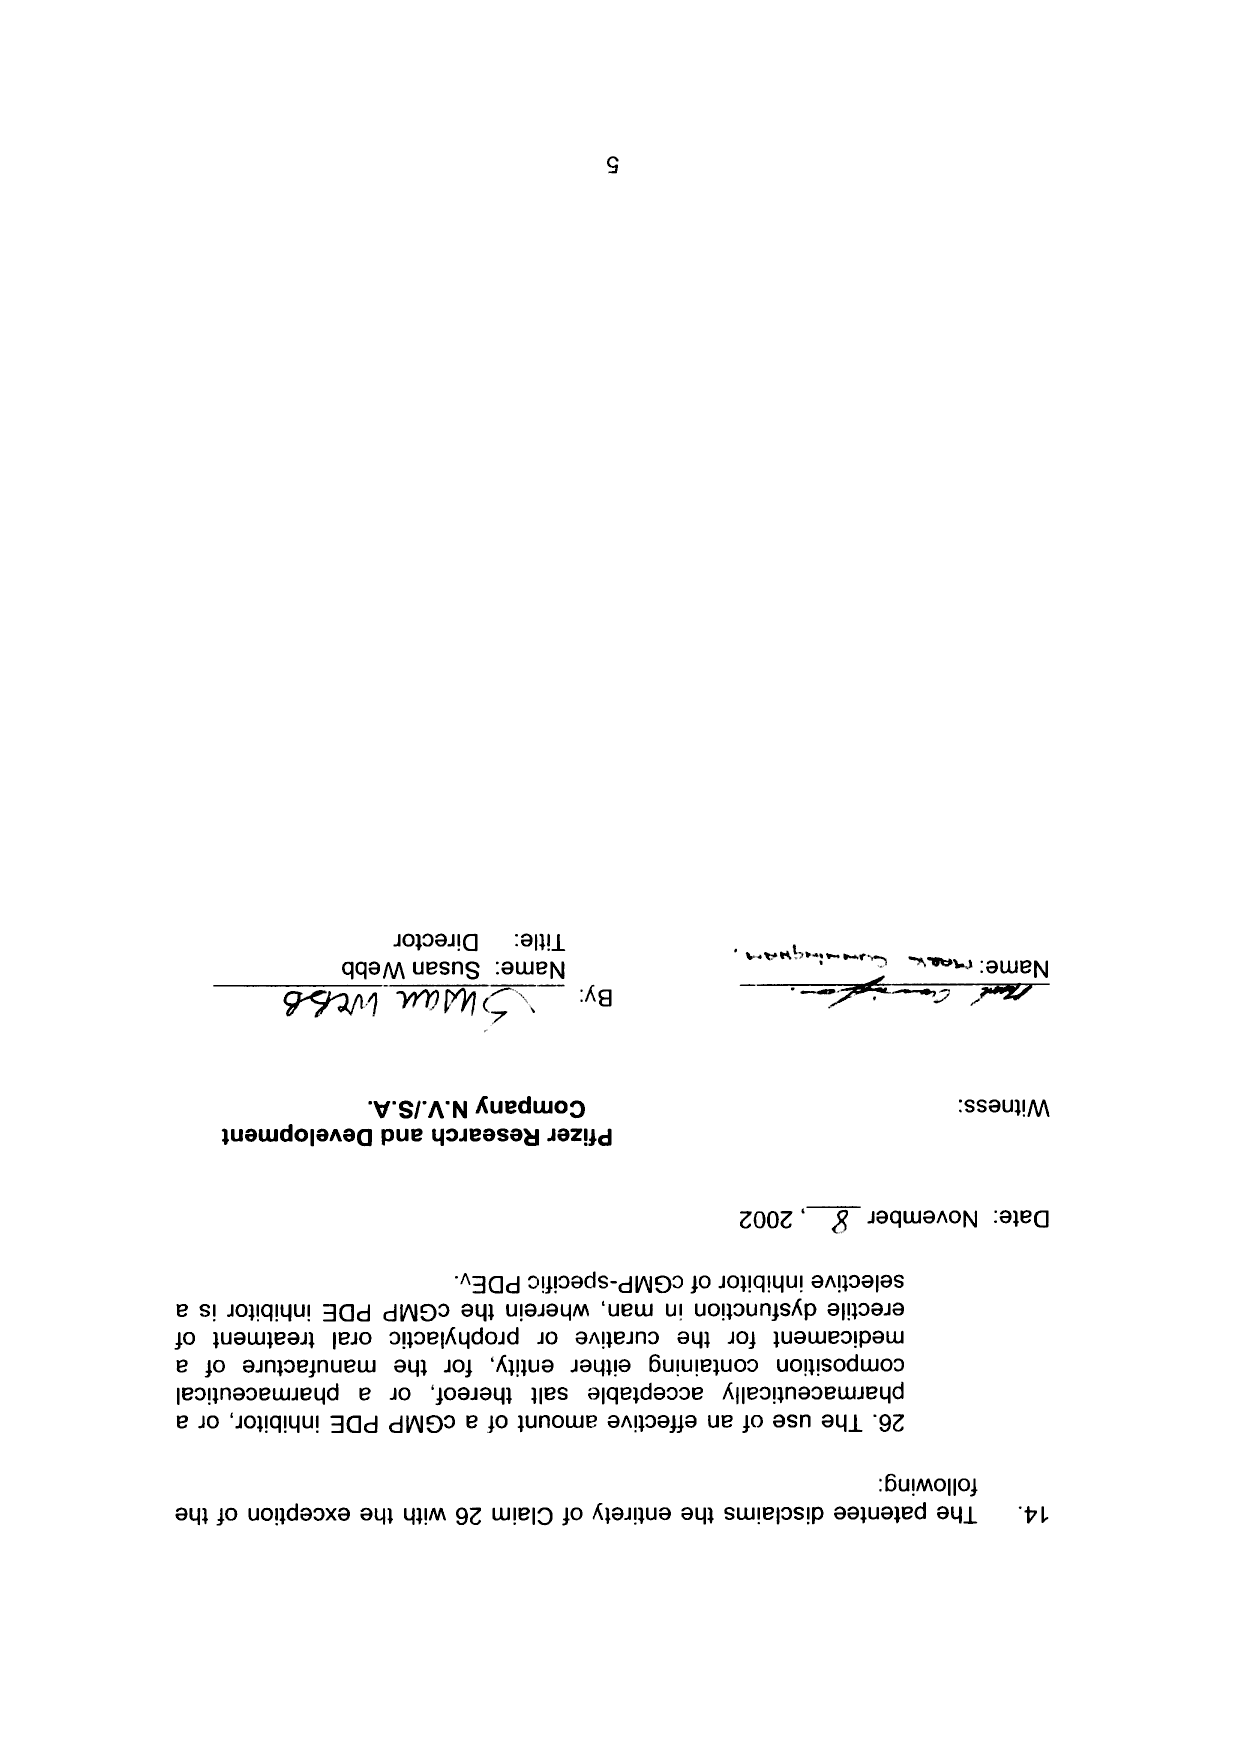 Canadian Patent Document 2163446. Cover Page 20011211. Image 7 of 7